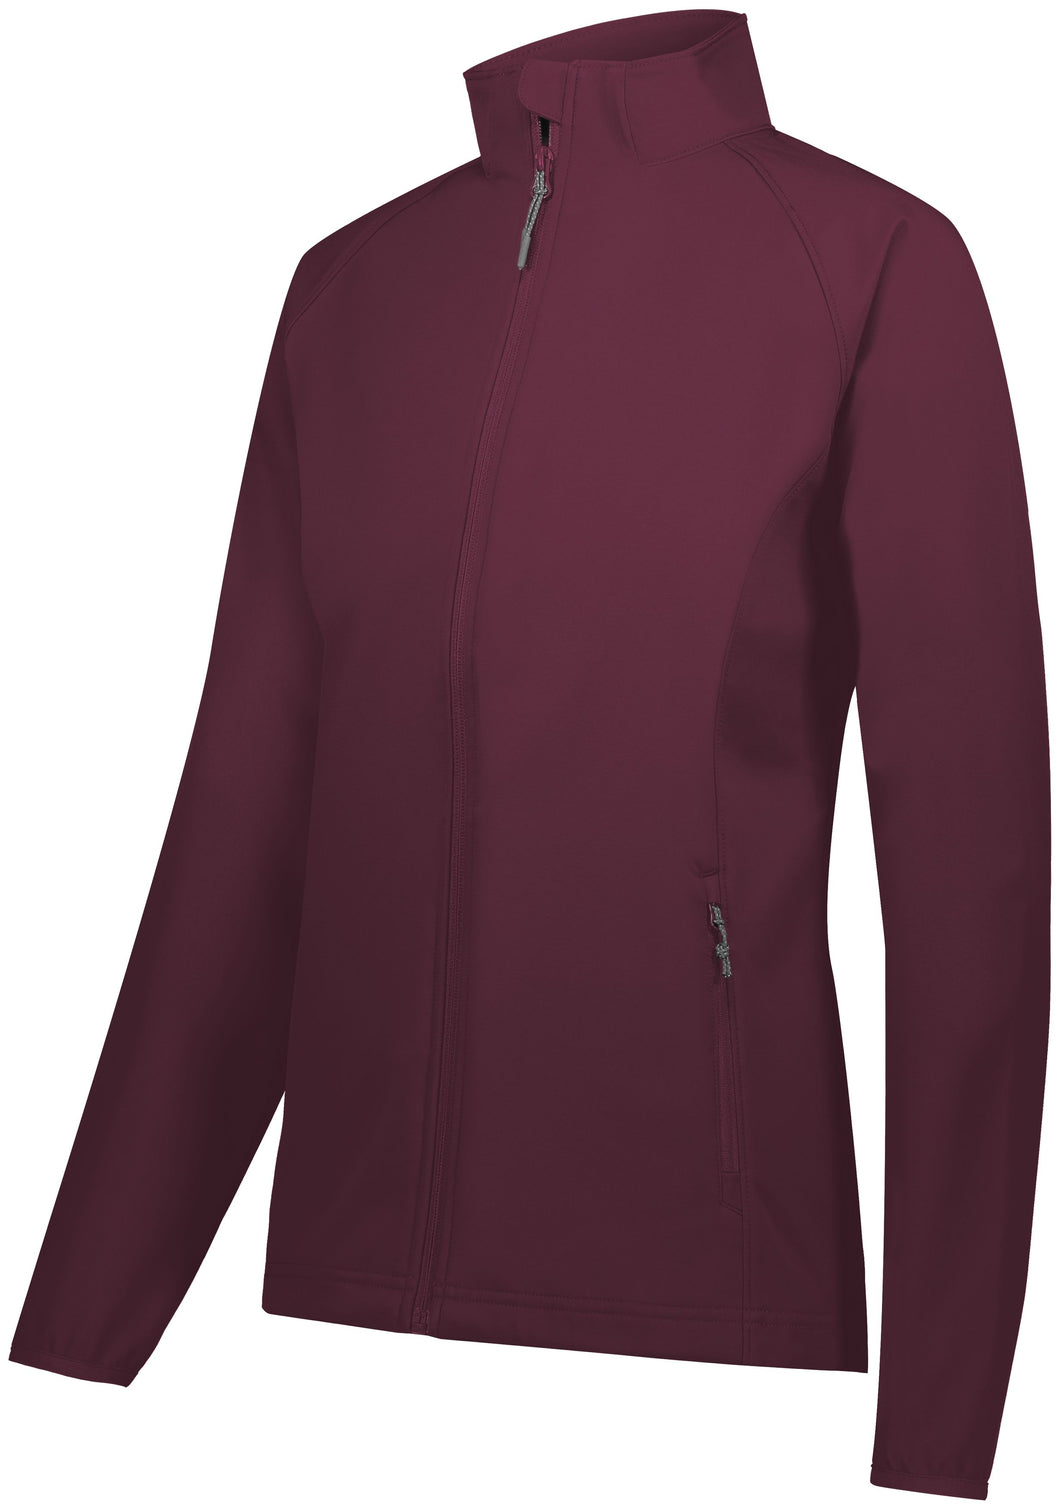 IN STOCK - Ladies Featherlight Soft Shell Jacket